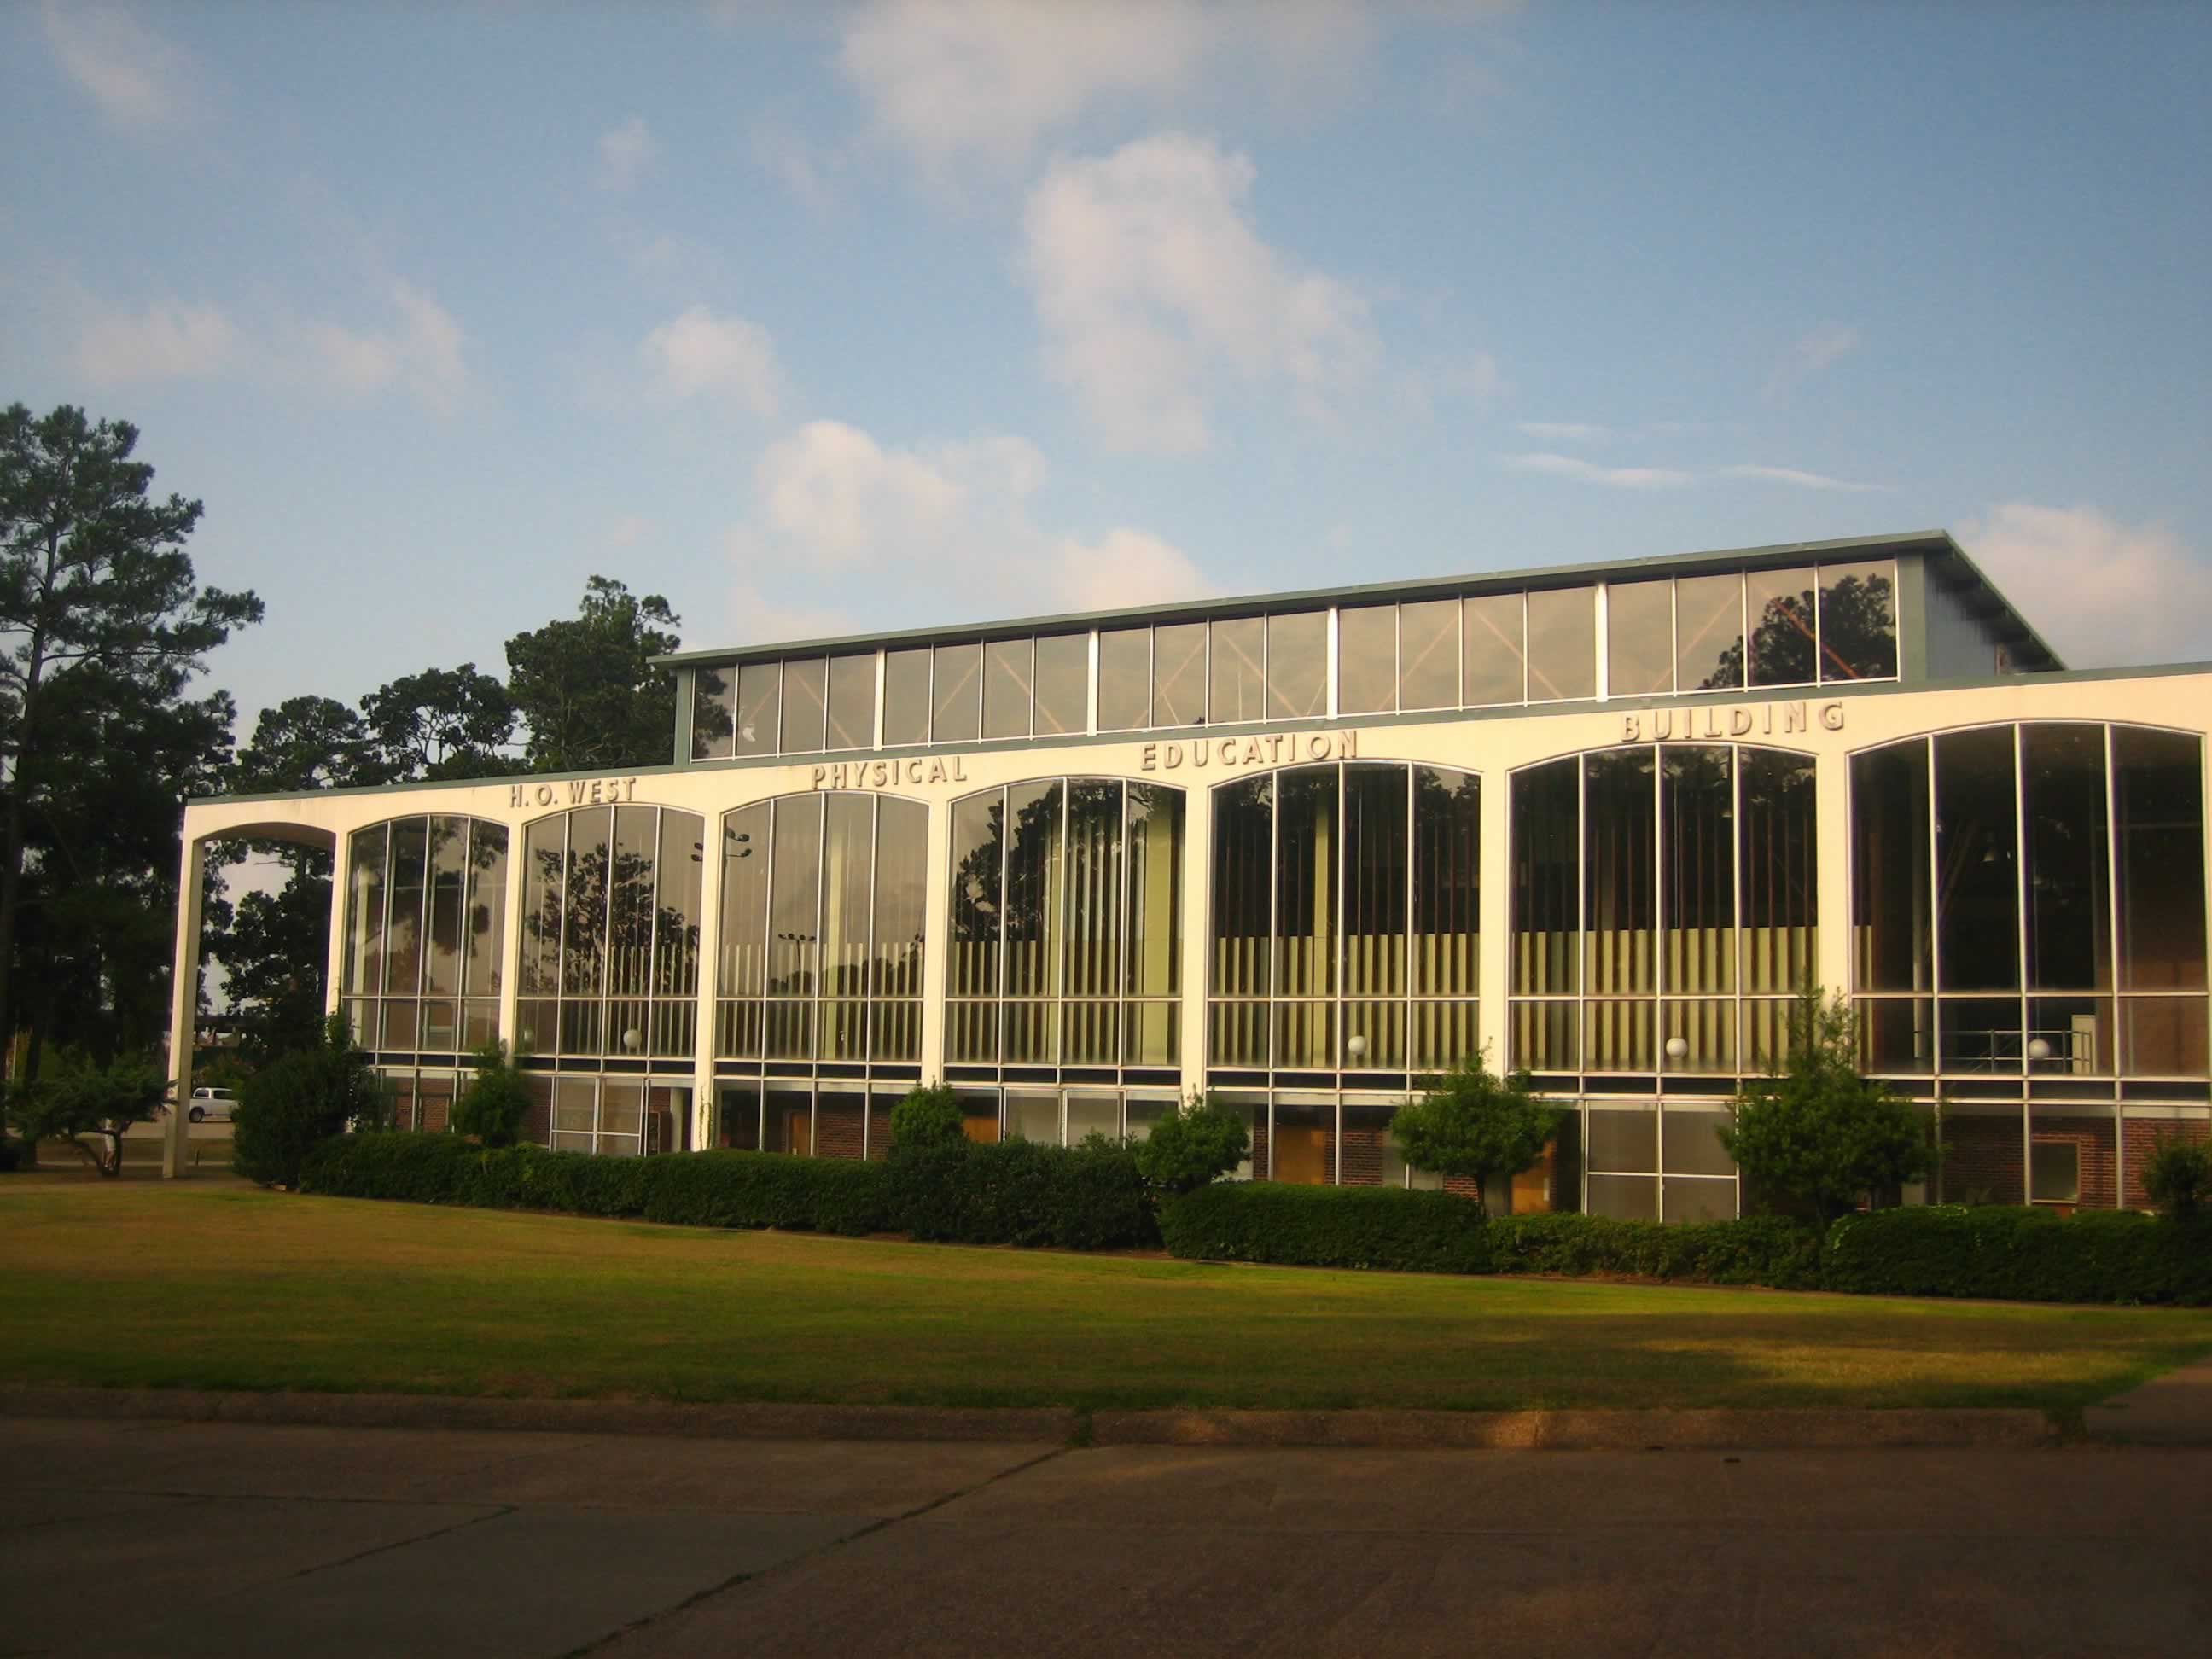 The H.O. West Physical Education Building at Louisiana Christian University